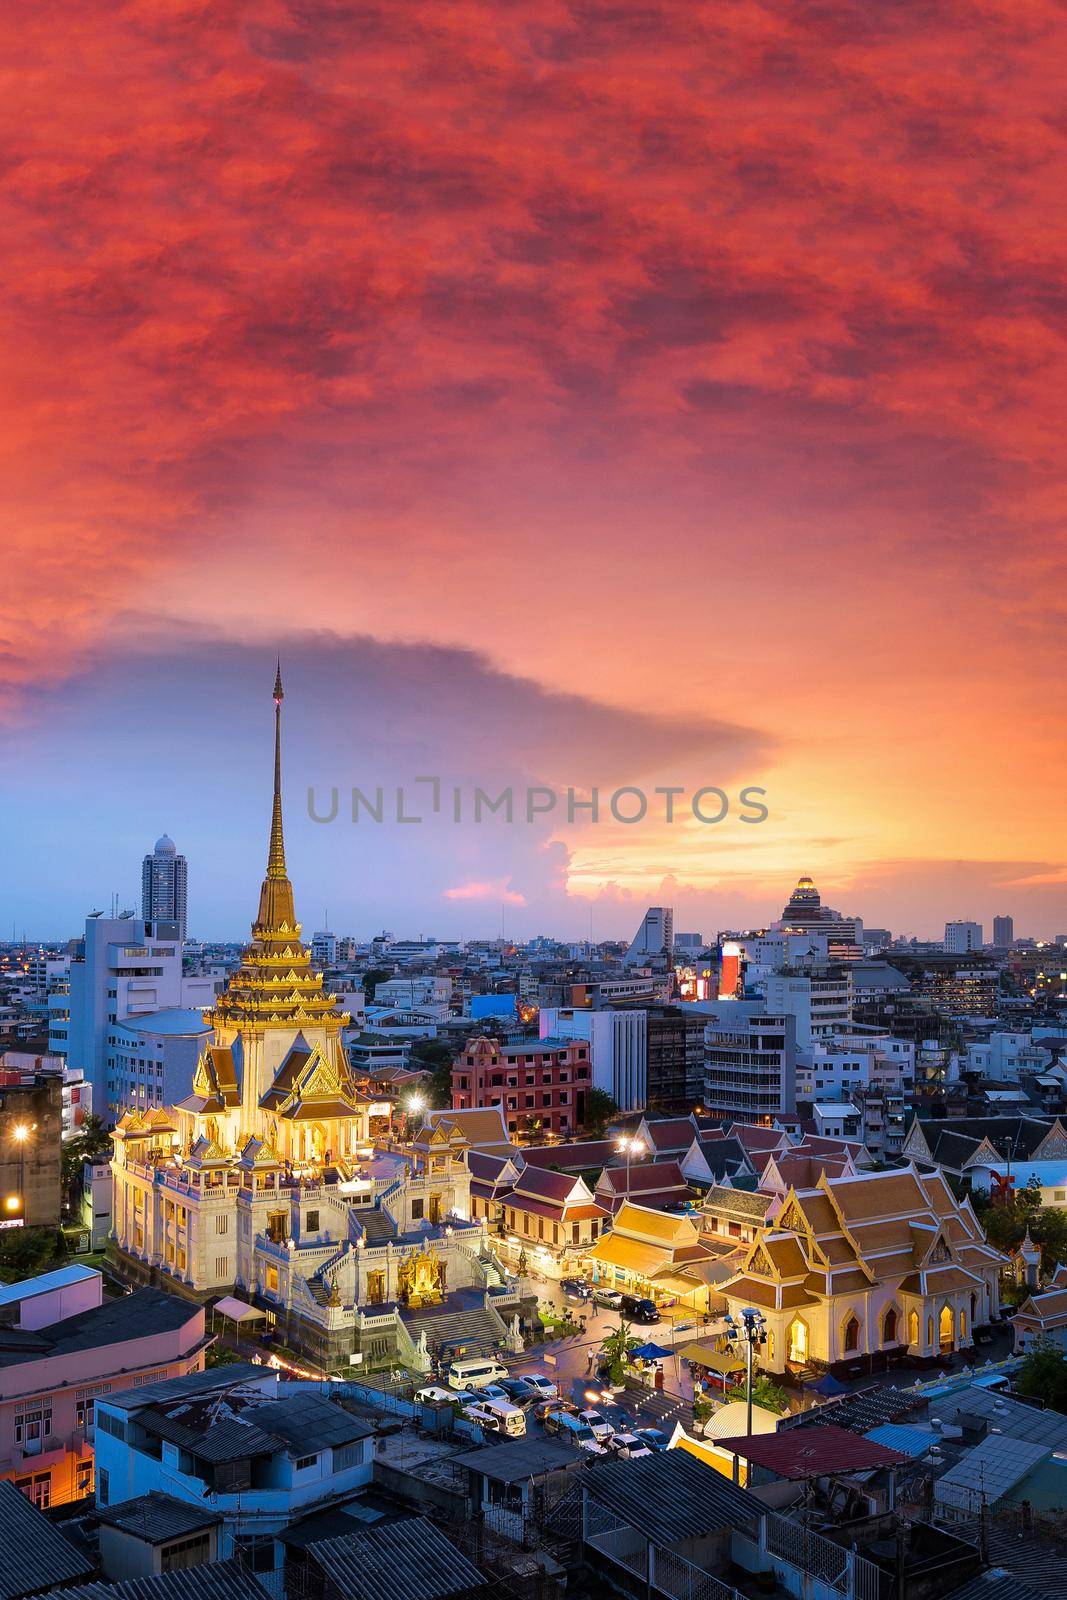 Landscape view of Wat Traimit Witthayaram Worawihan attractive bangkok's temple for tourism at sunset. Temple of the Biggest Golden Buddha in Bangkok, Thailand